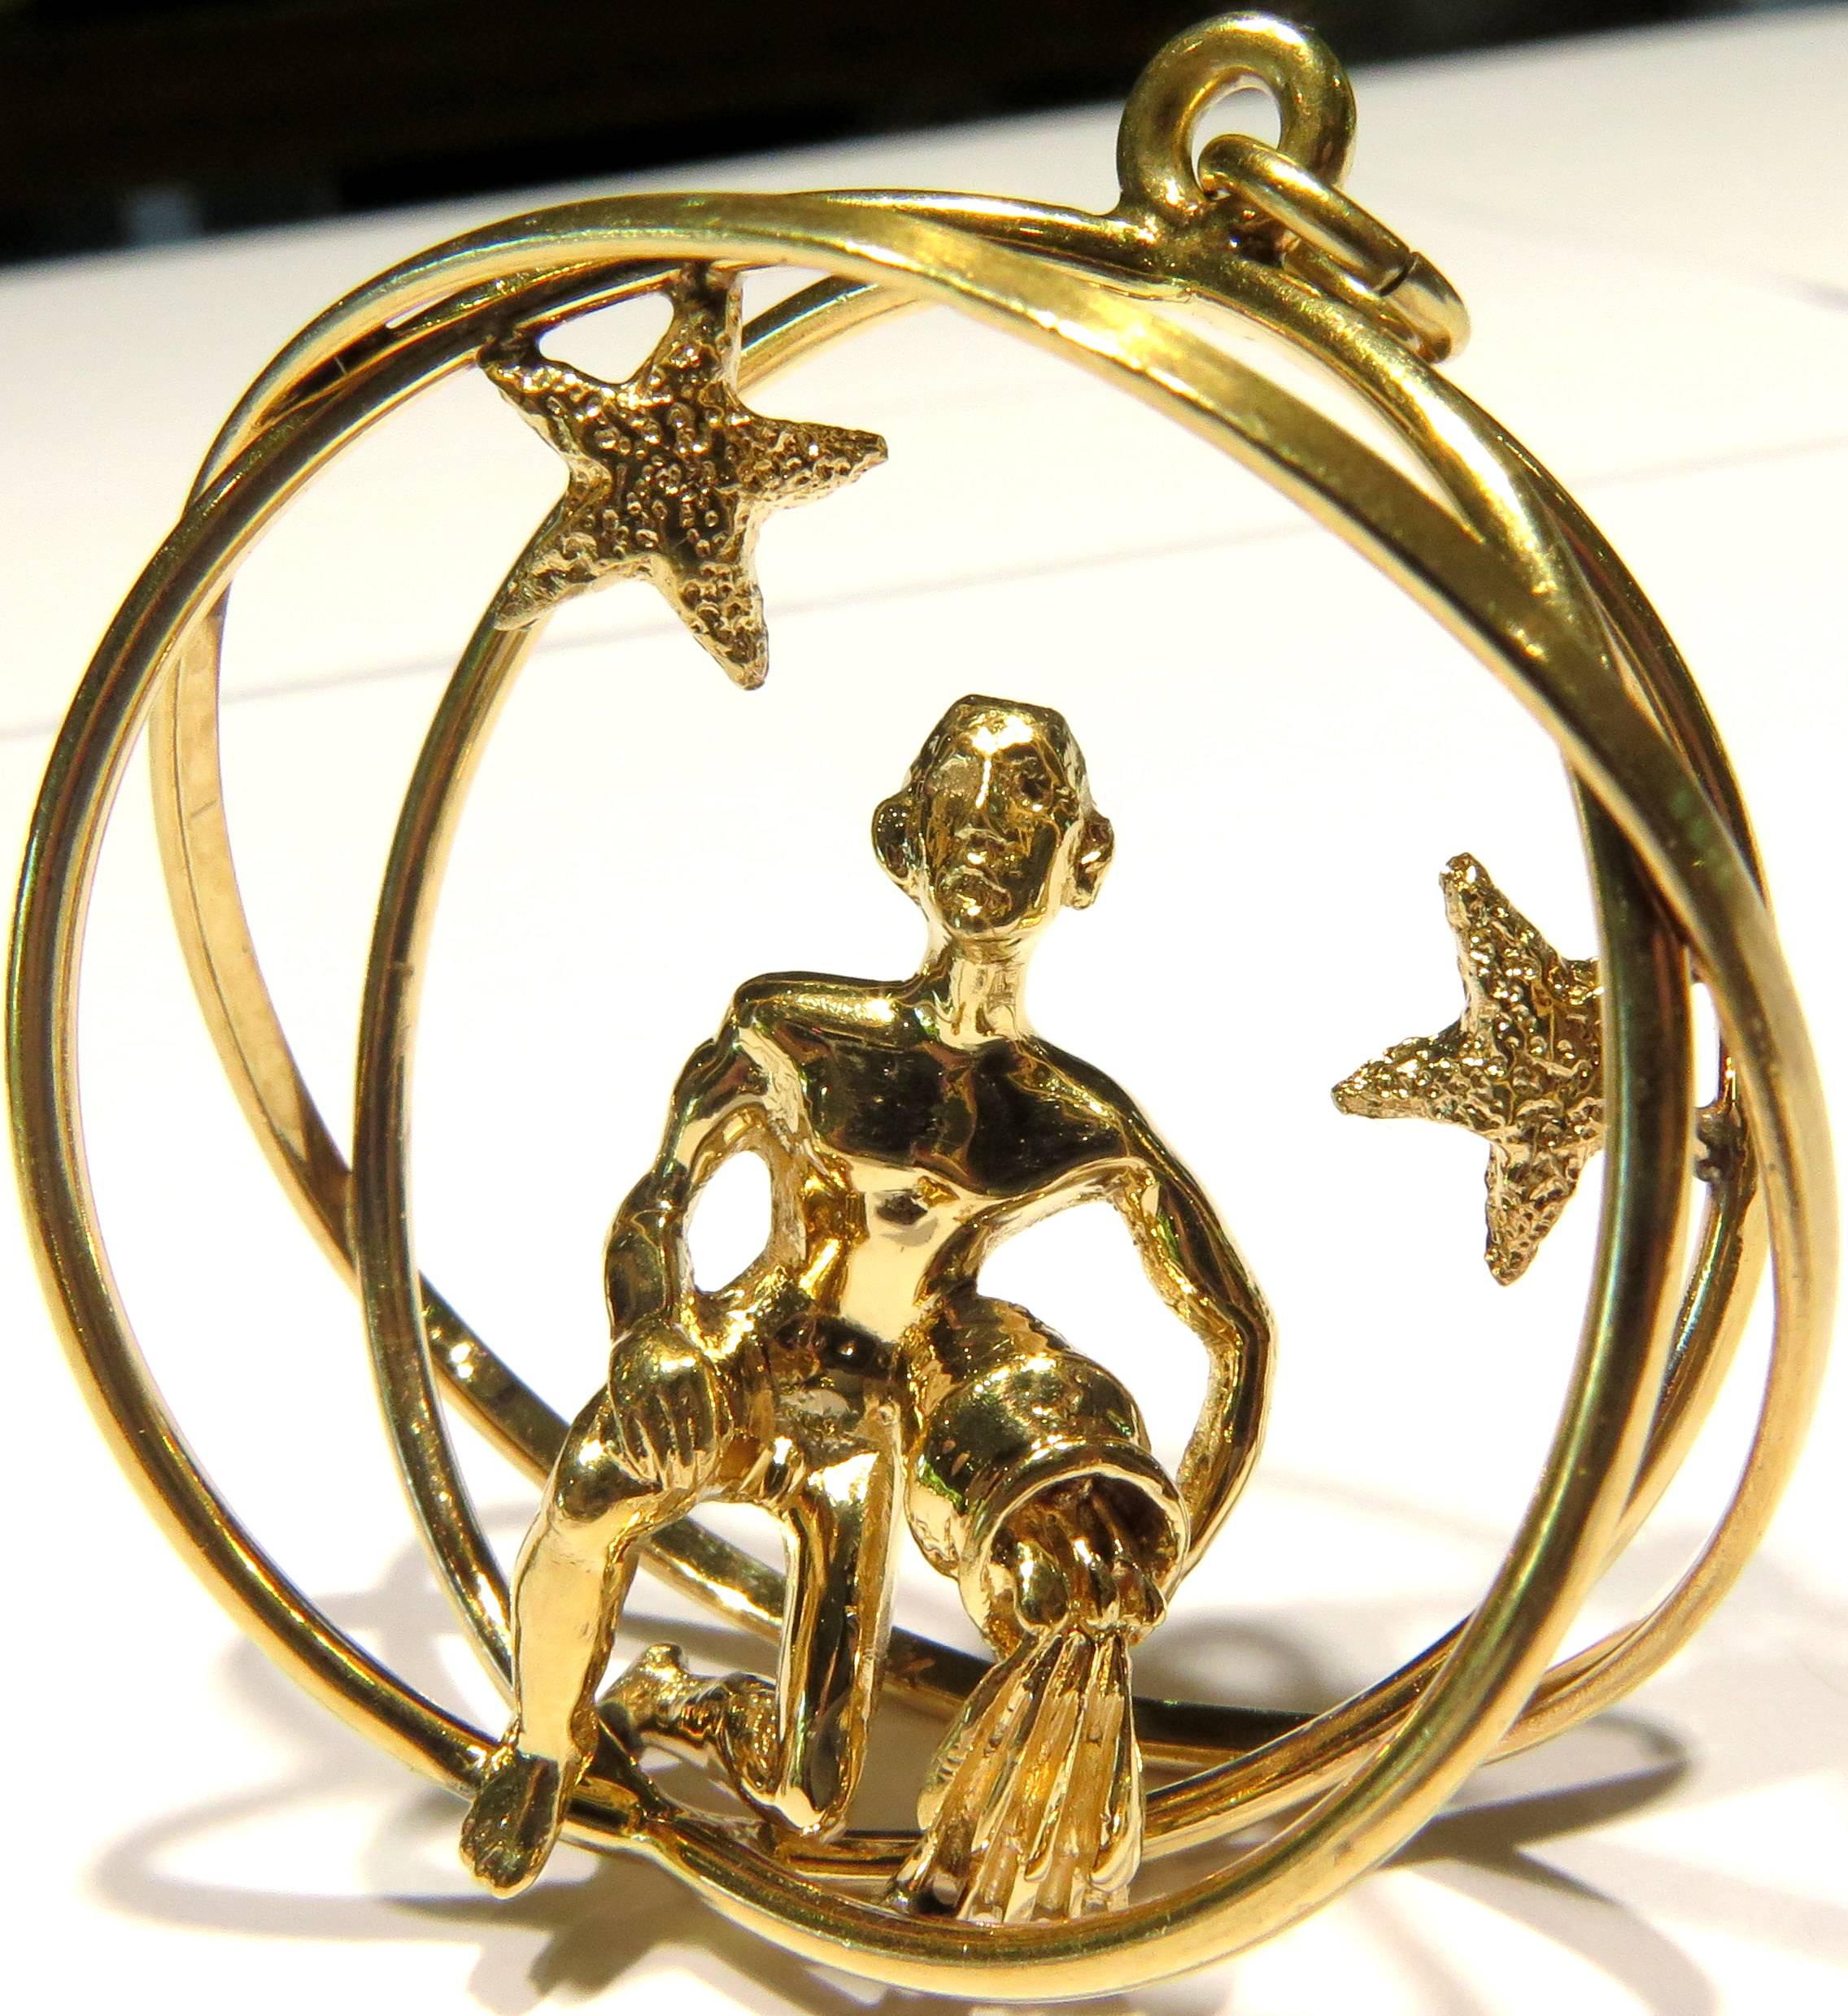 This amazing 3 D anatomically correct man pouring water from an urn is surrounded by 3 sphere's and two star's is technically an Aquarius sign, but you certainly don't need to be an Aquarius to wear it!  I bought it over 50 years ago just because I